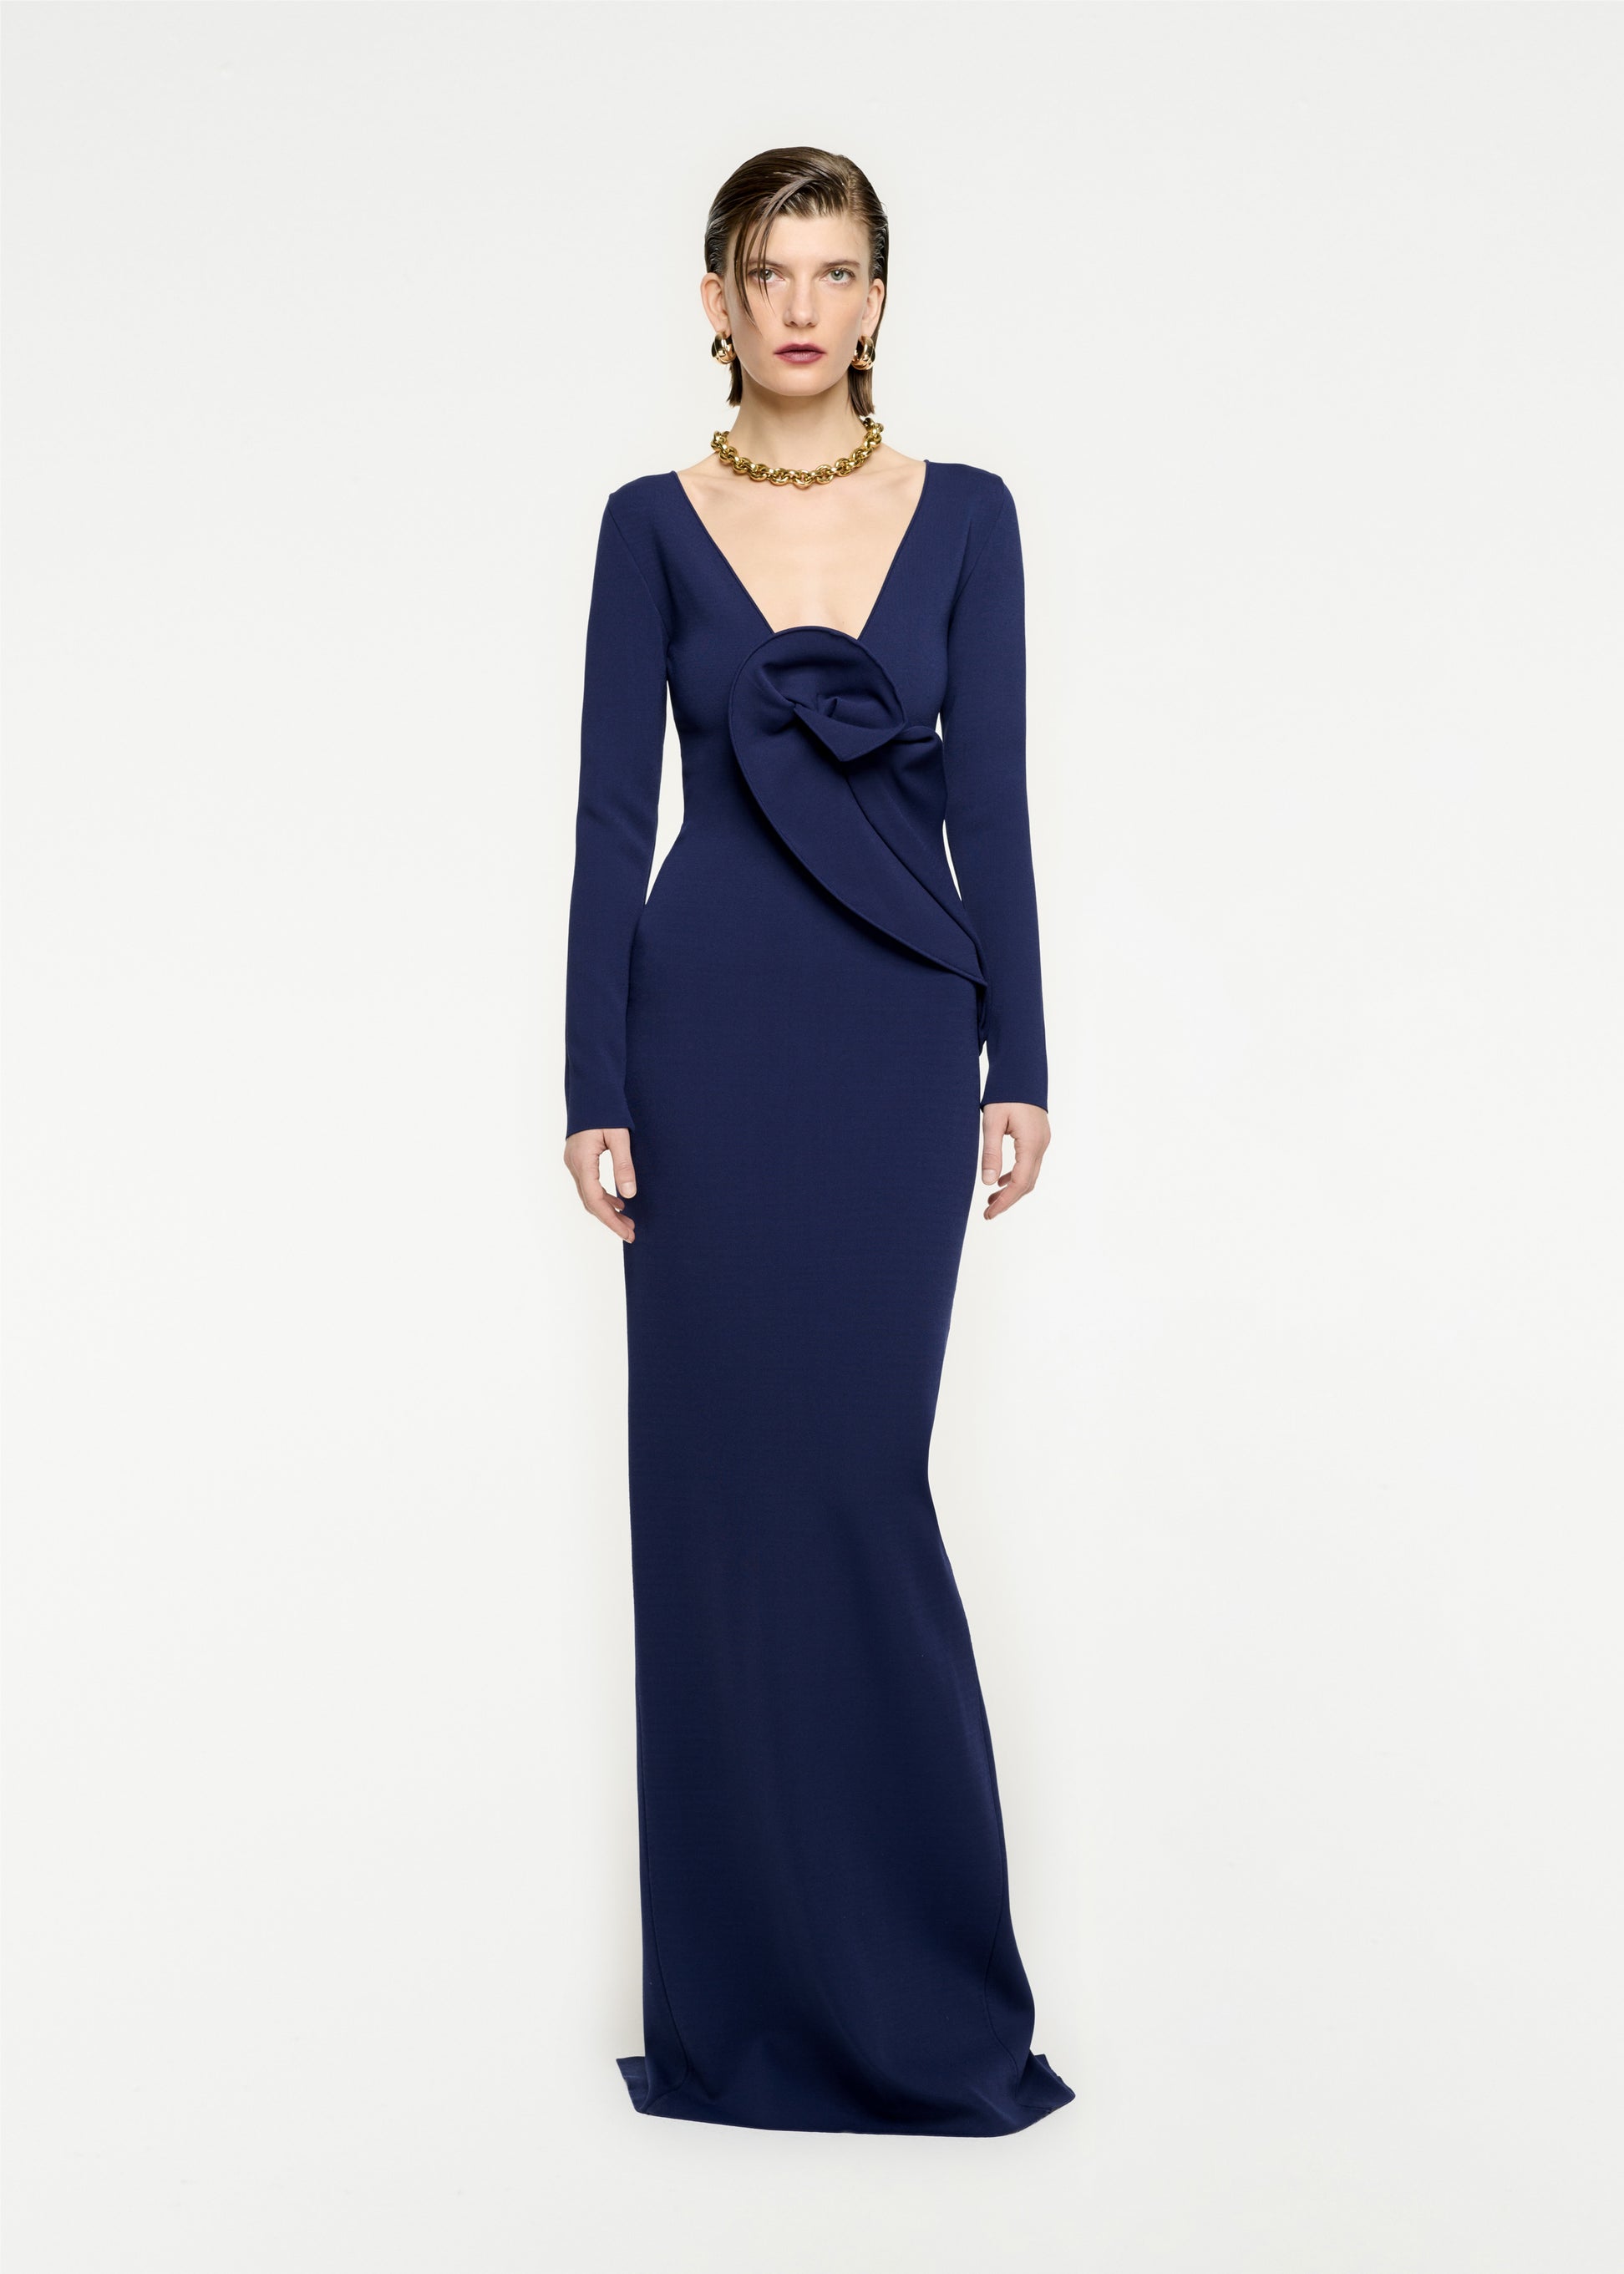 Woman wearing the Long Sleeve Knit Maxi Dress in Navy